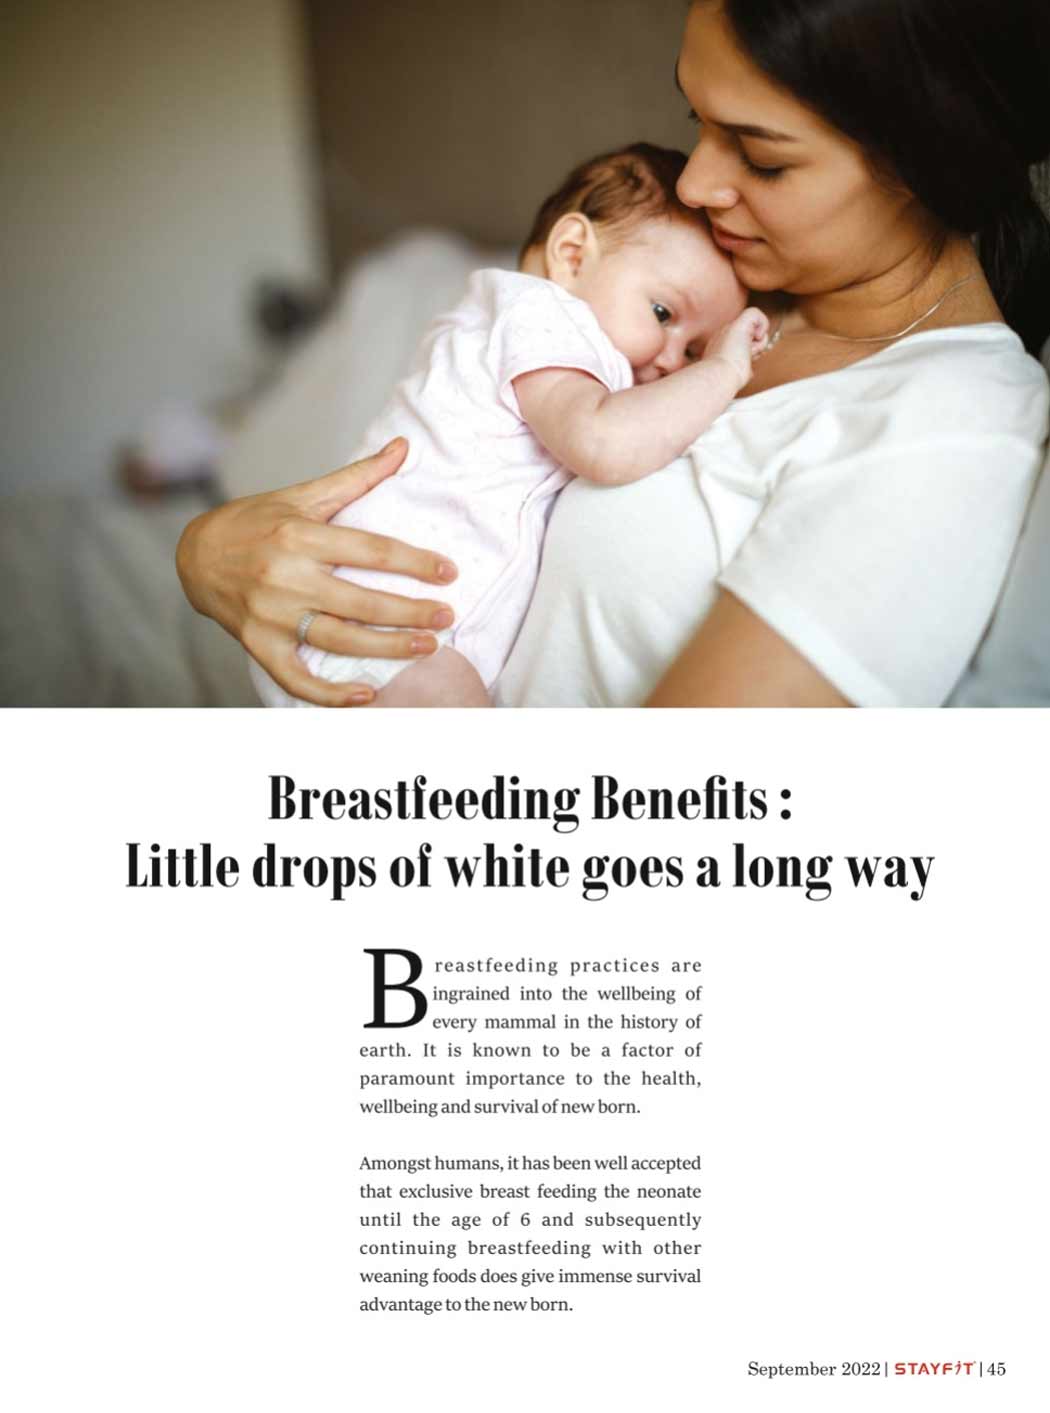 Breastfeeding benefits: Little drops of white goes a long way